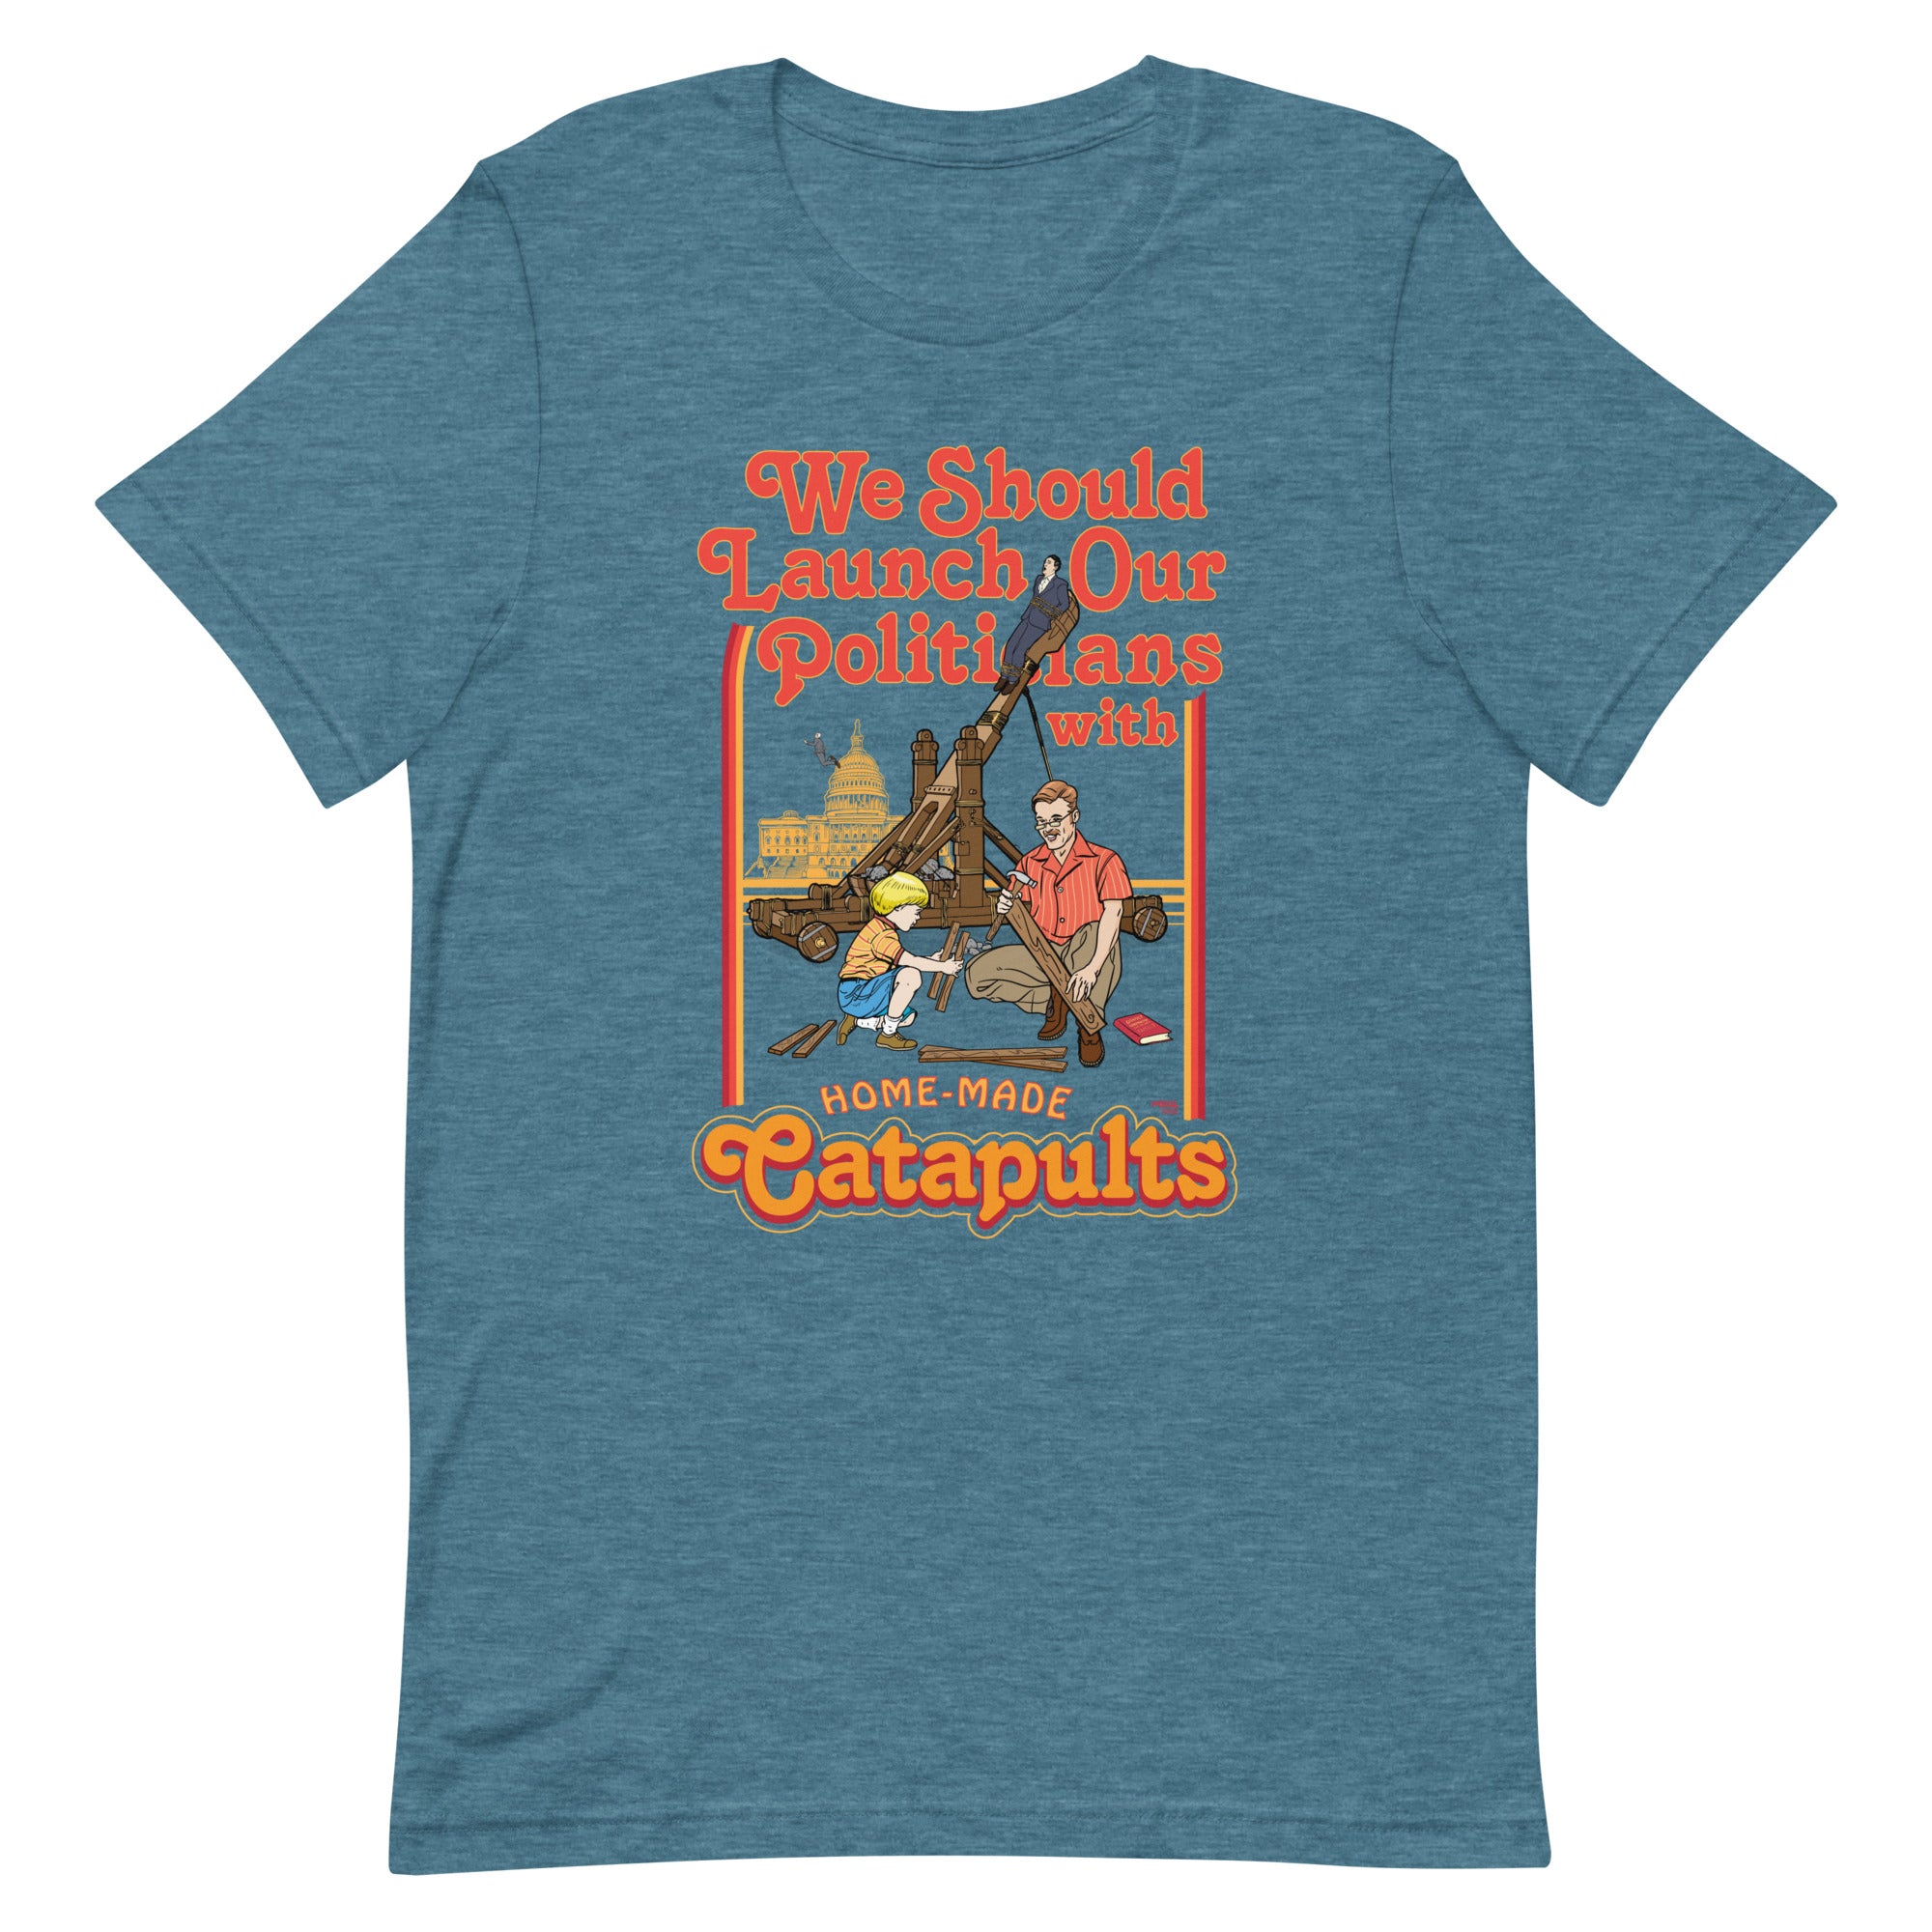 We Should Launch Our Politicians with Homemade Catapults T-Shirt